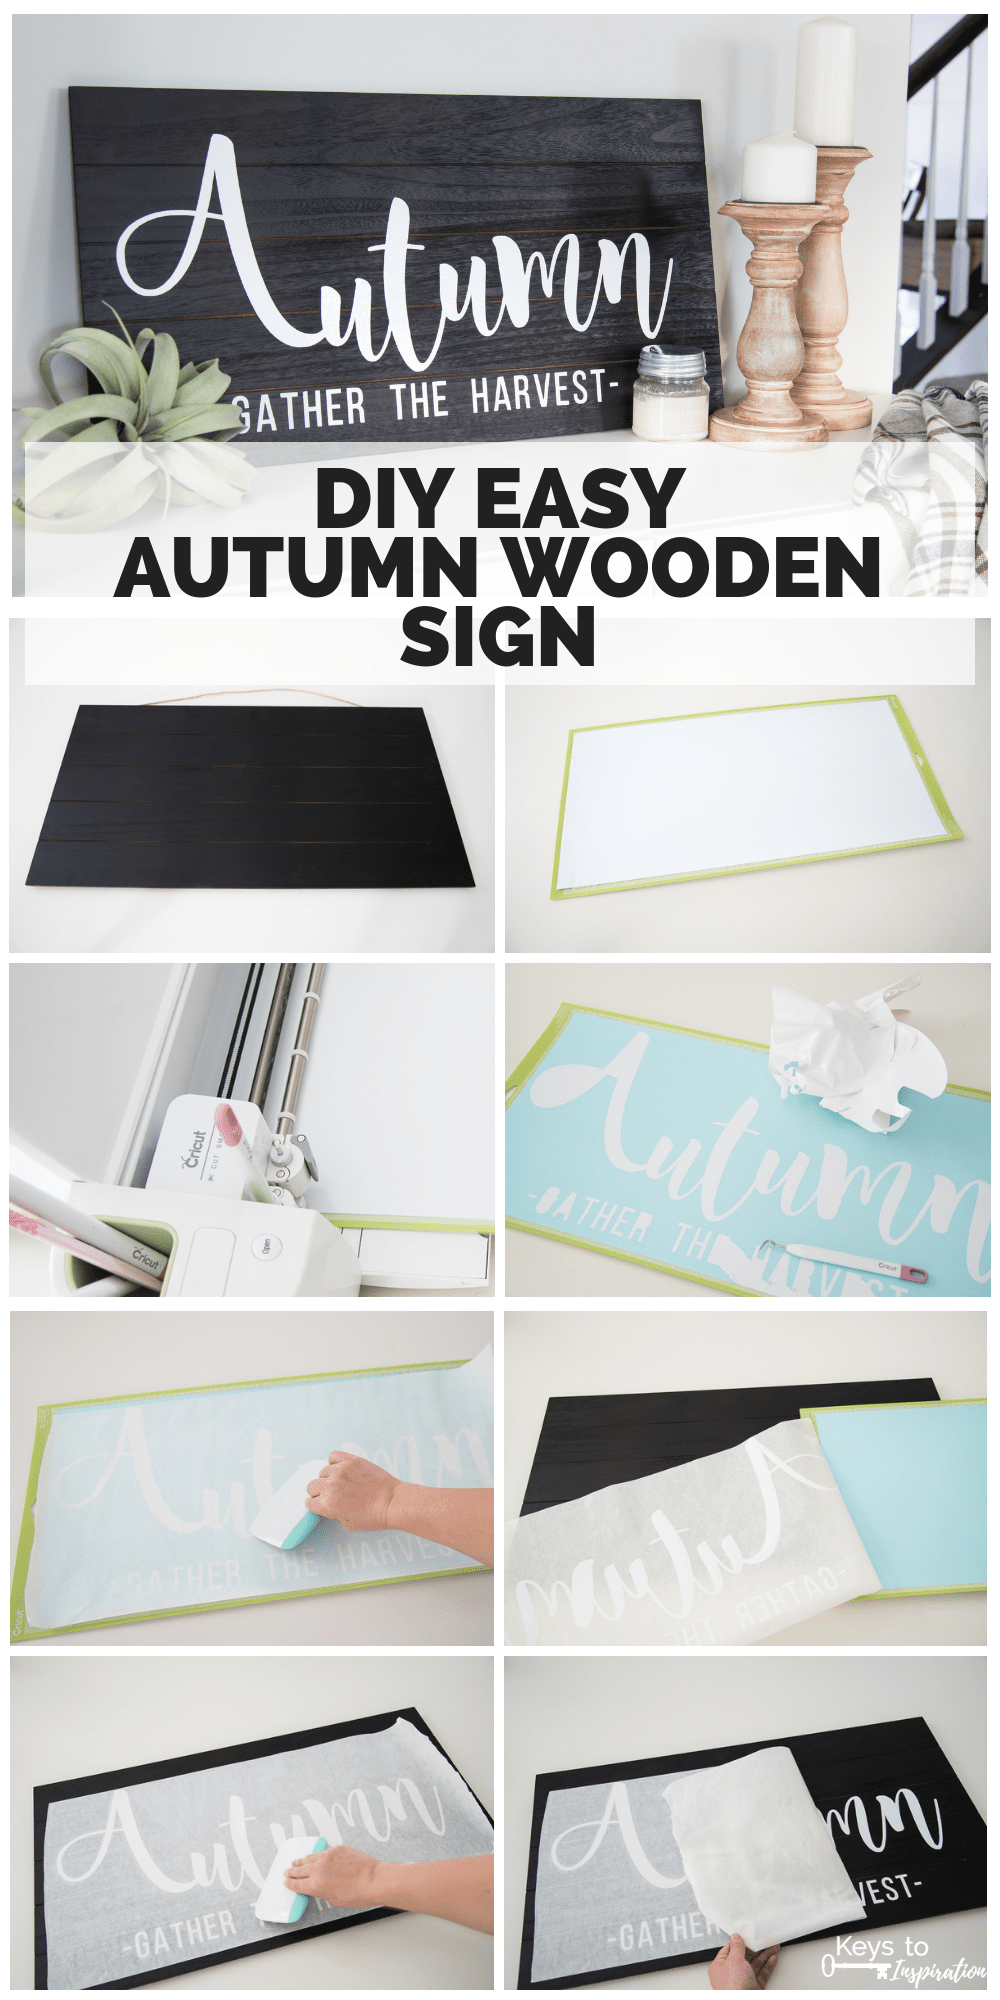 DIY Easy Autumn Wooden Sign -   17 diy projects Useful creative ideas